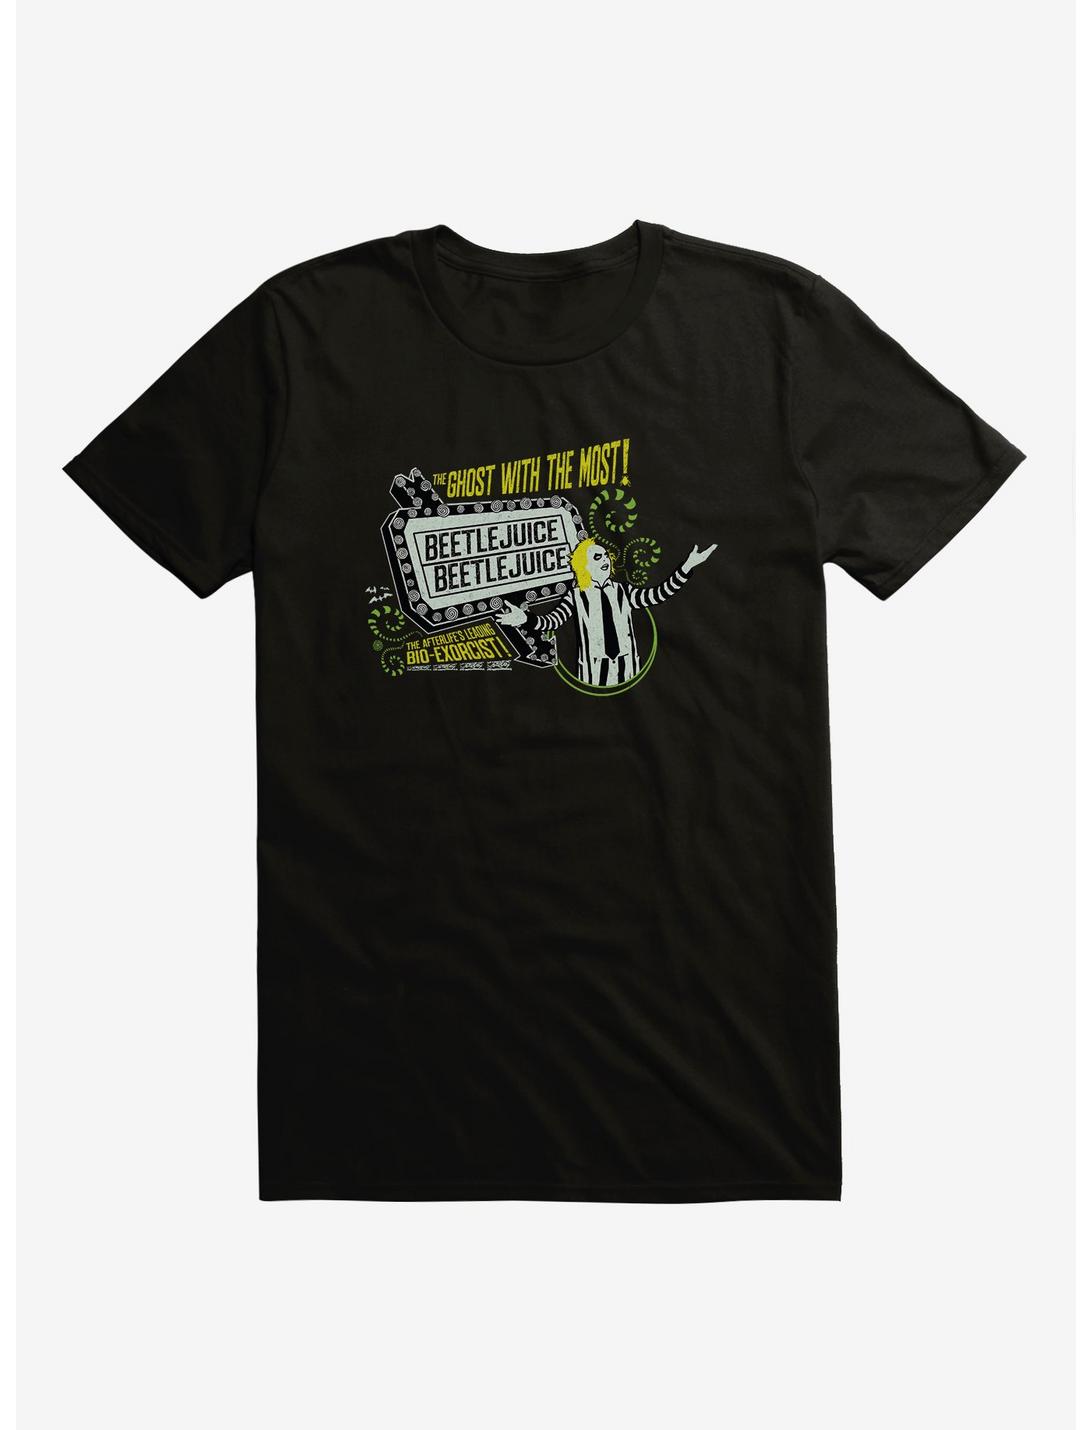 Beetlejuice Ghost With The Most T-Shirt, BLACK, hi-res